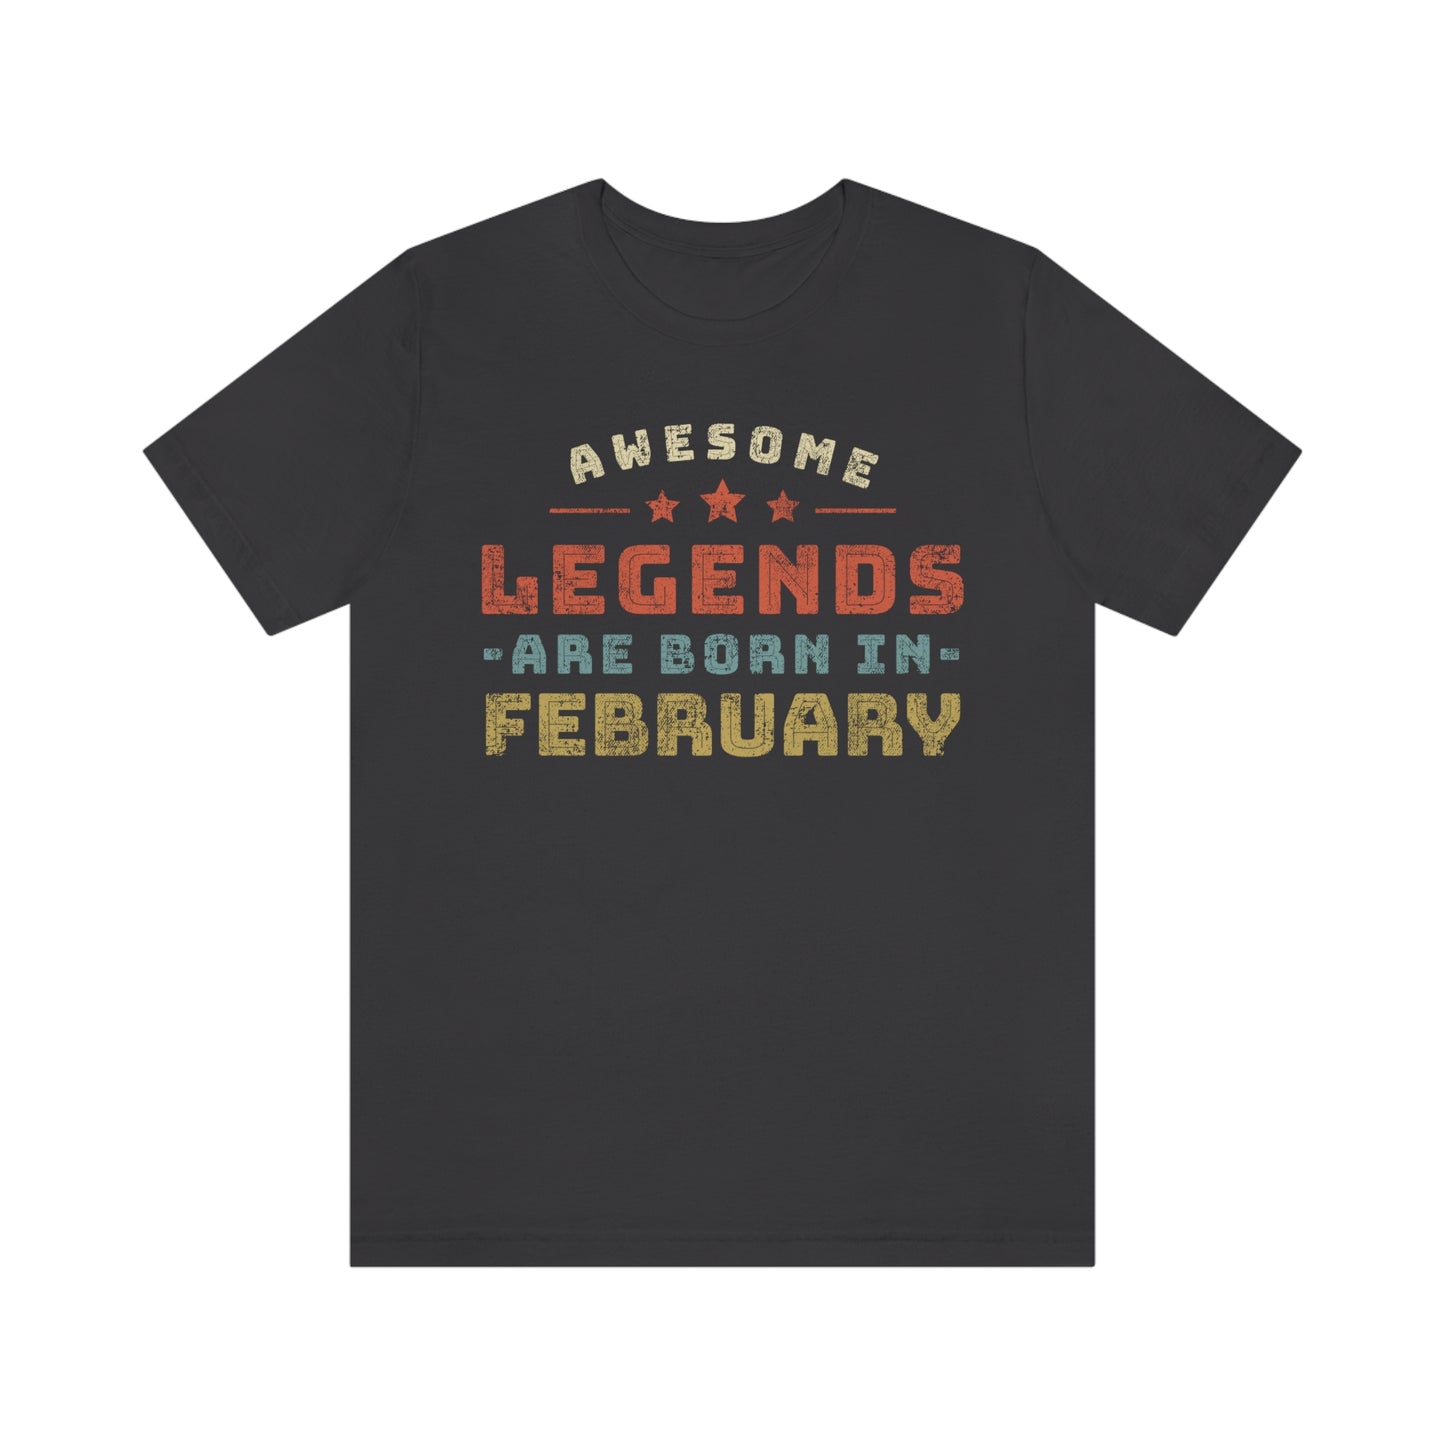 Awesome Legends are born in February, Birthday gifts for women or men - 37 Design Unit